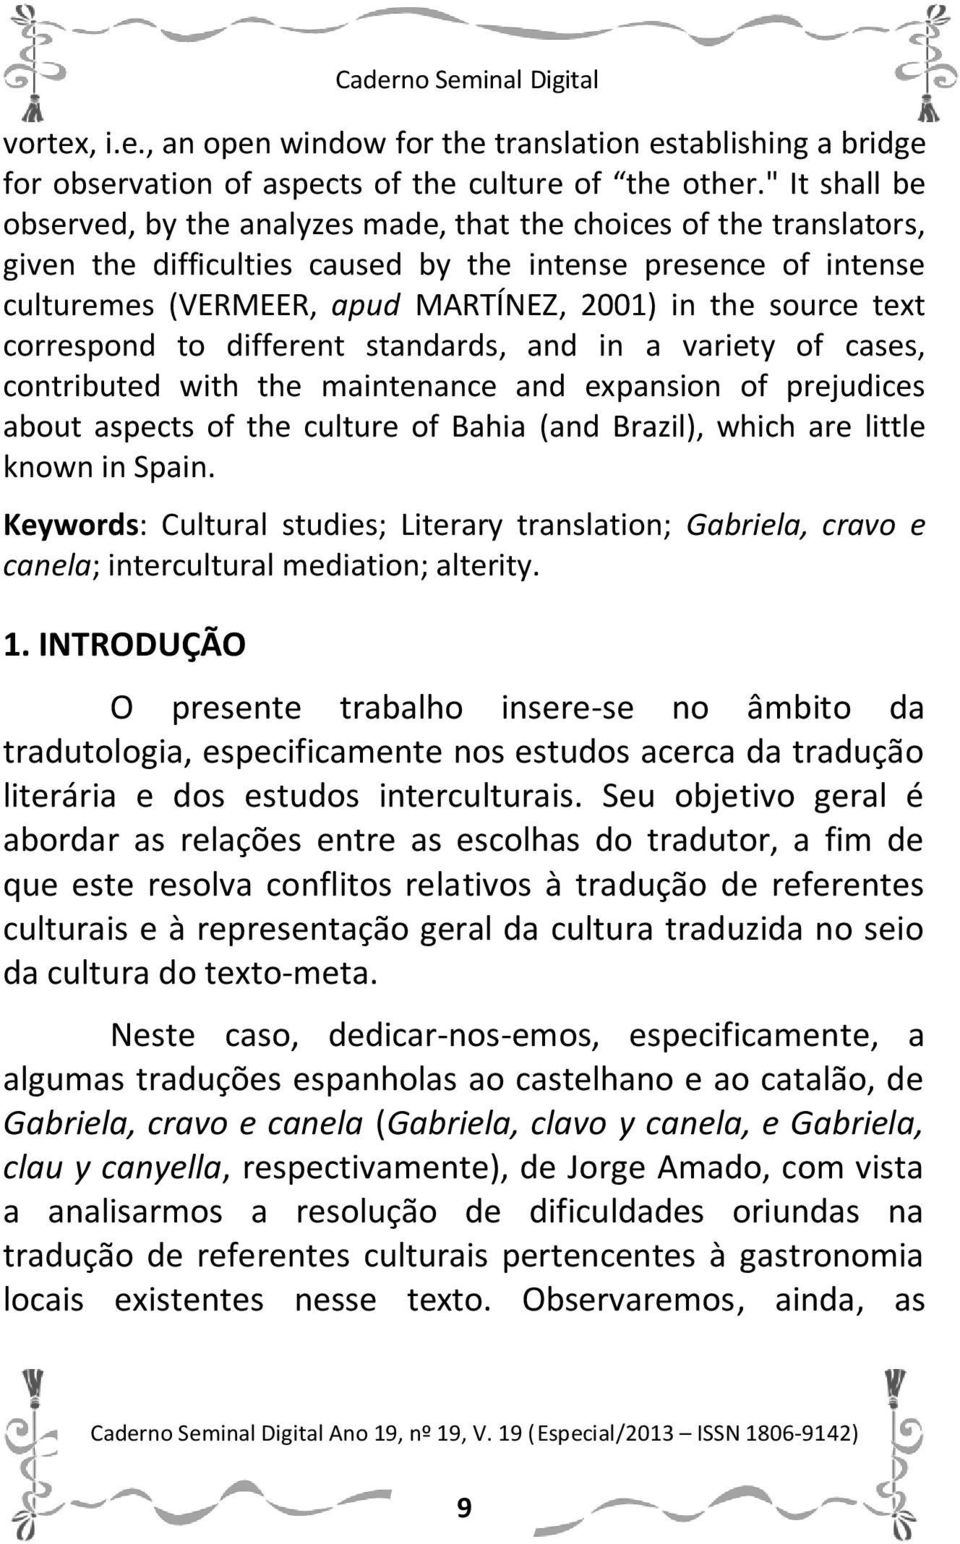 source text correspond to different standards, and in a variety of cases, contributed with the maintenance and expansion of prejudices about aspects of the culture of Bahia (and Brazil), which are